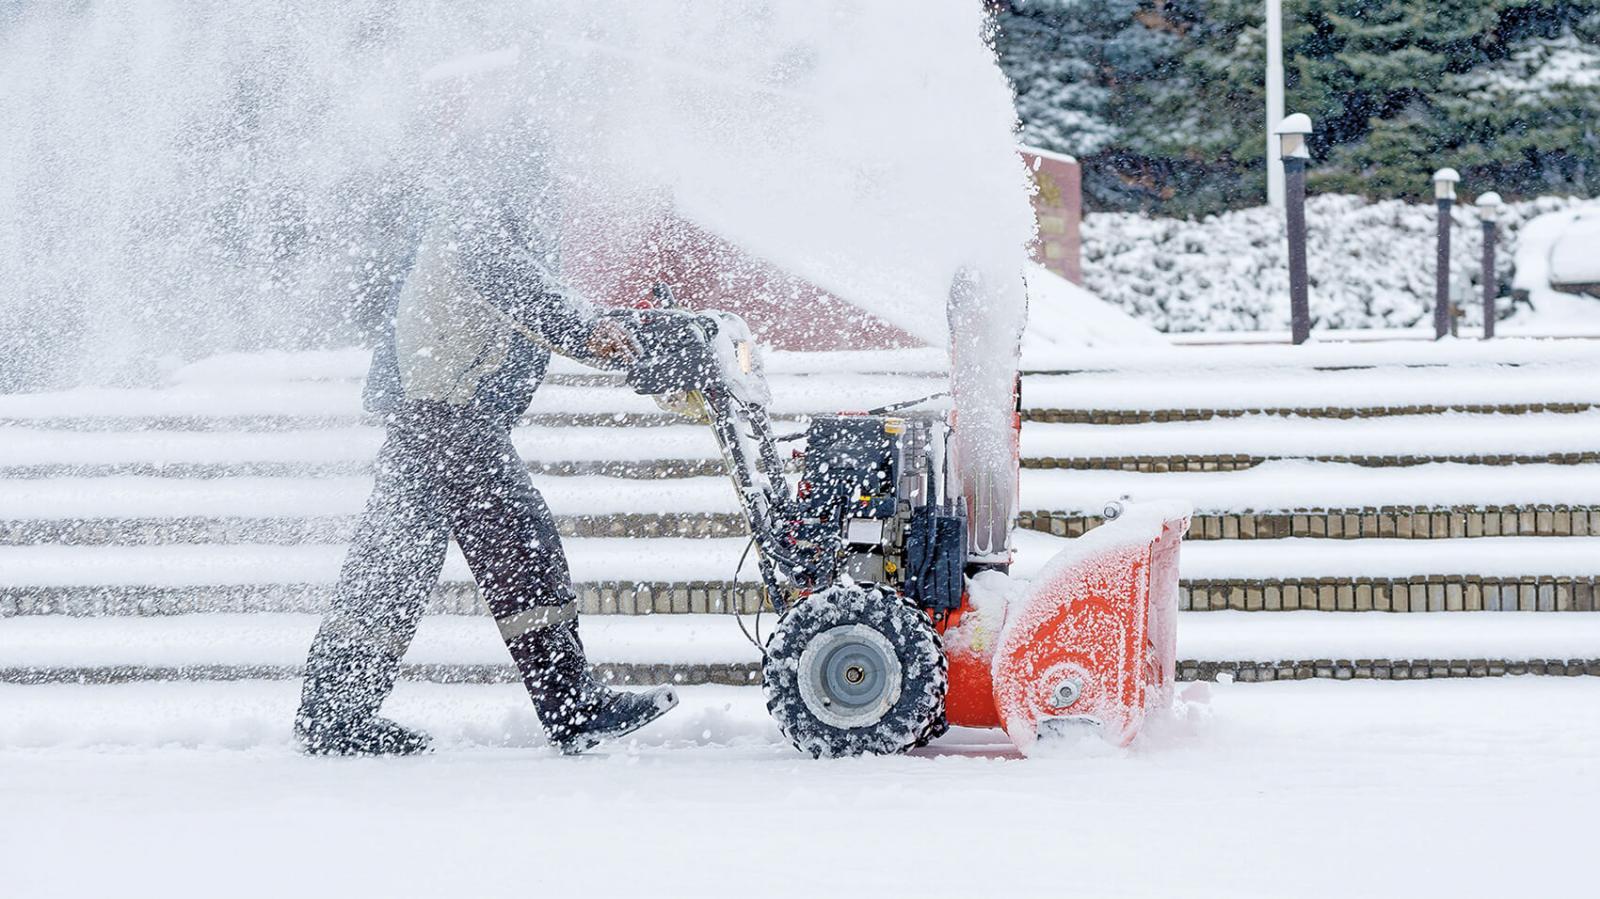 Snow removal contractors share tips on how to mitigate insurance claims